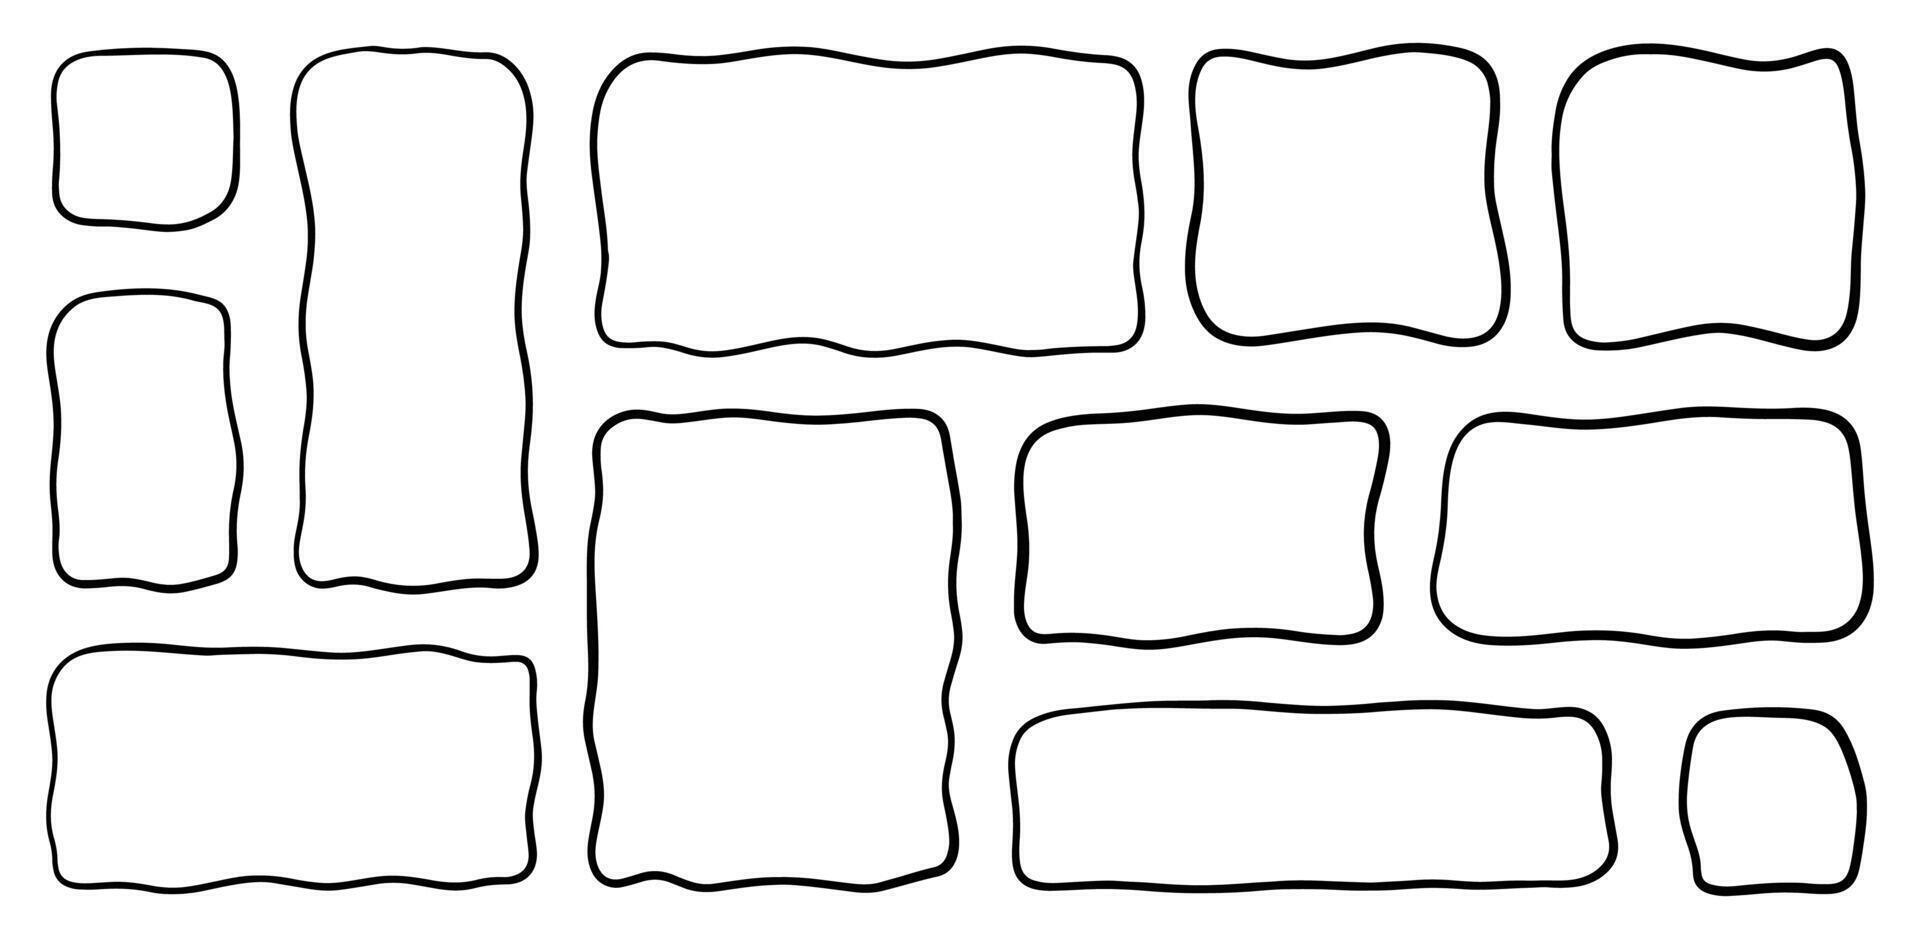 Hand drawn wavy curve edge frame. Doodle rectangle borders. Horizontal and vertical brush drawn squares vector